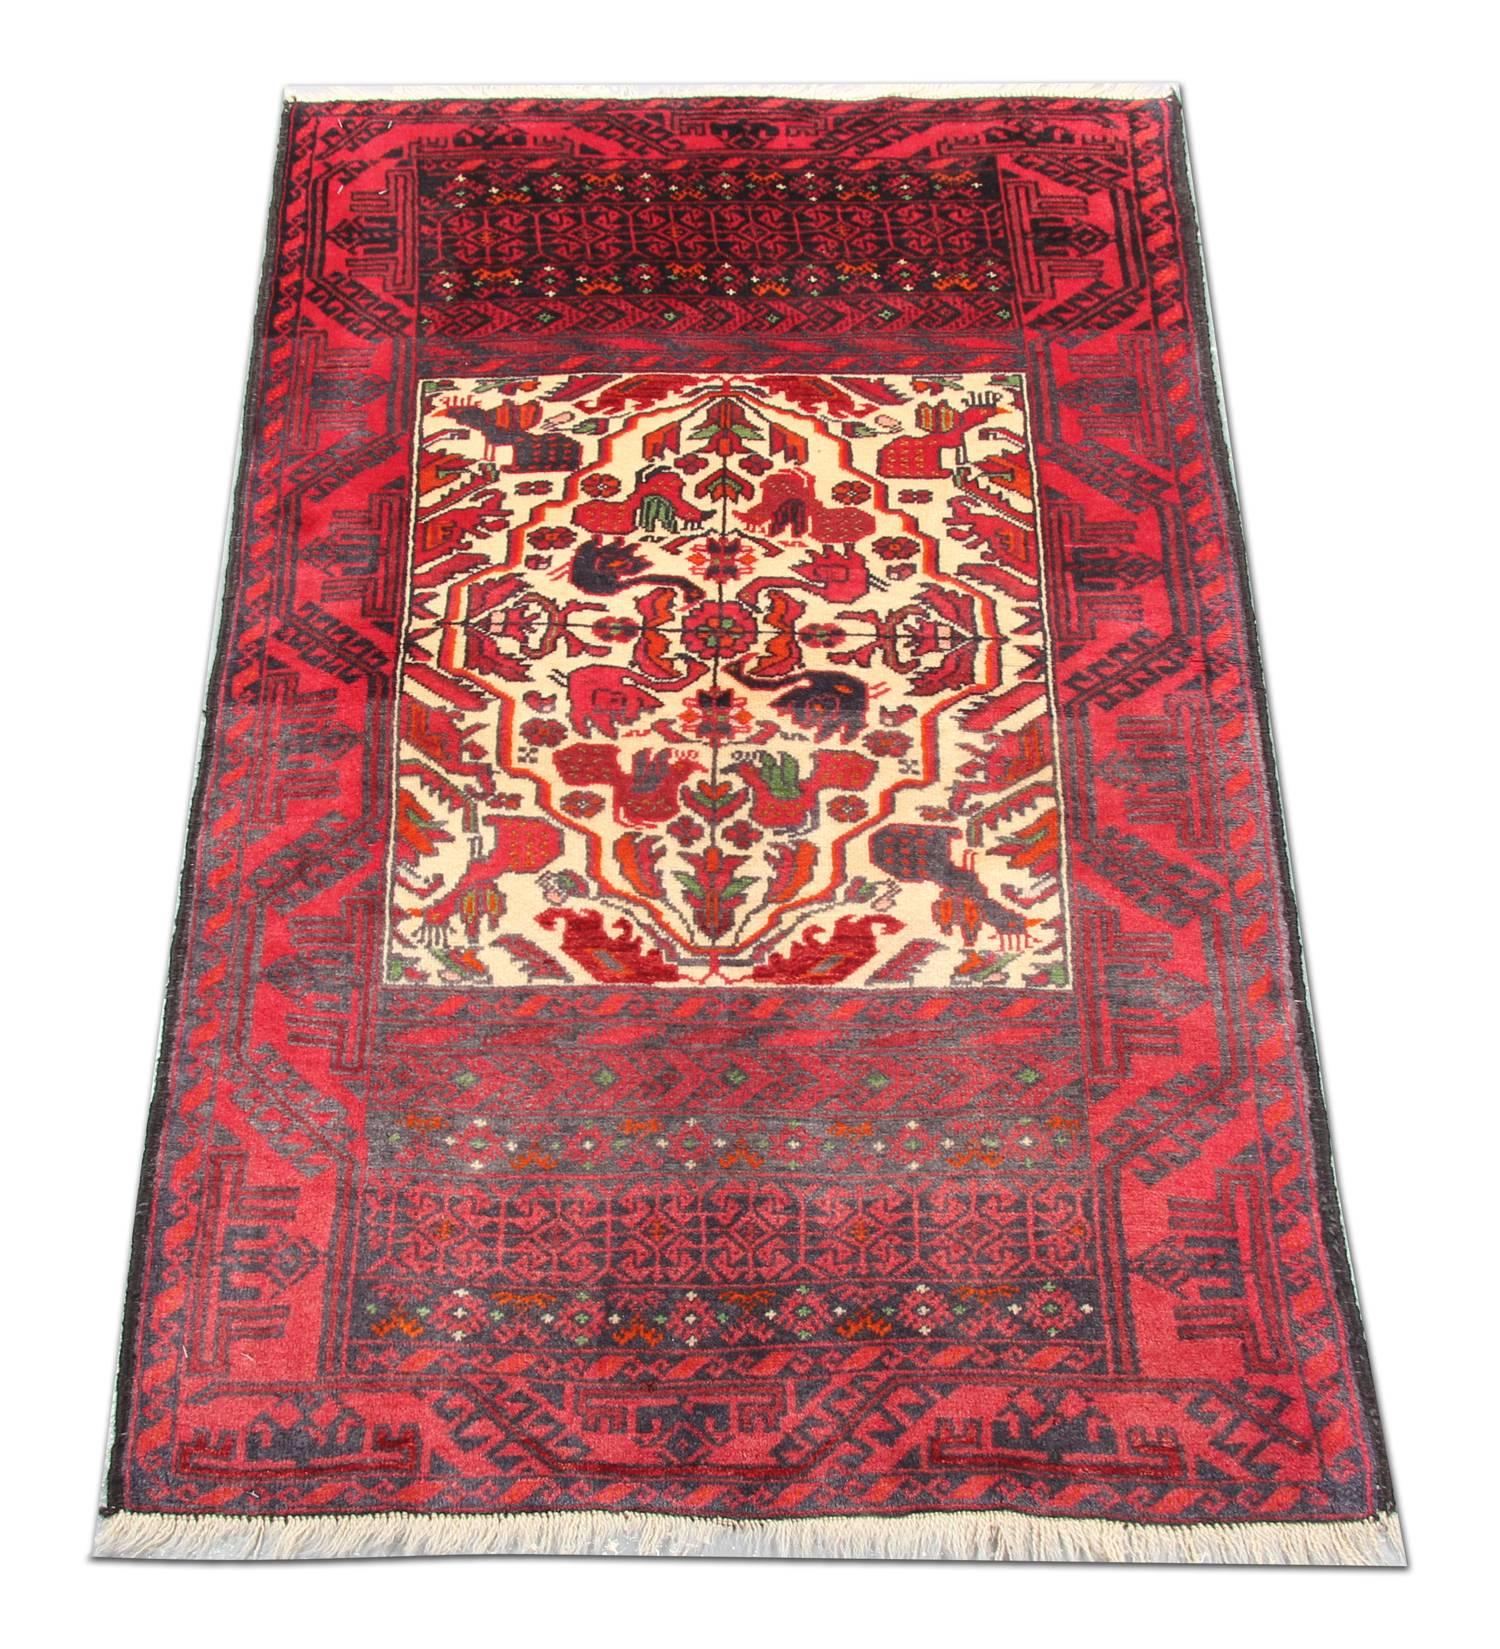 woven on a square cream background in accents of red, green and brown. This is then framed by a rich red symmetrical border. Both the central and surrounding designs have been intricately woven making a highly decorative area rug and the perfect